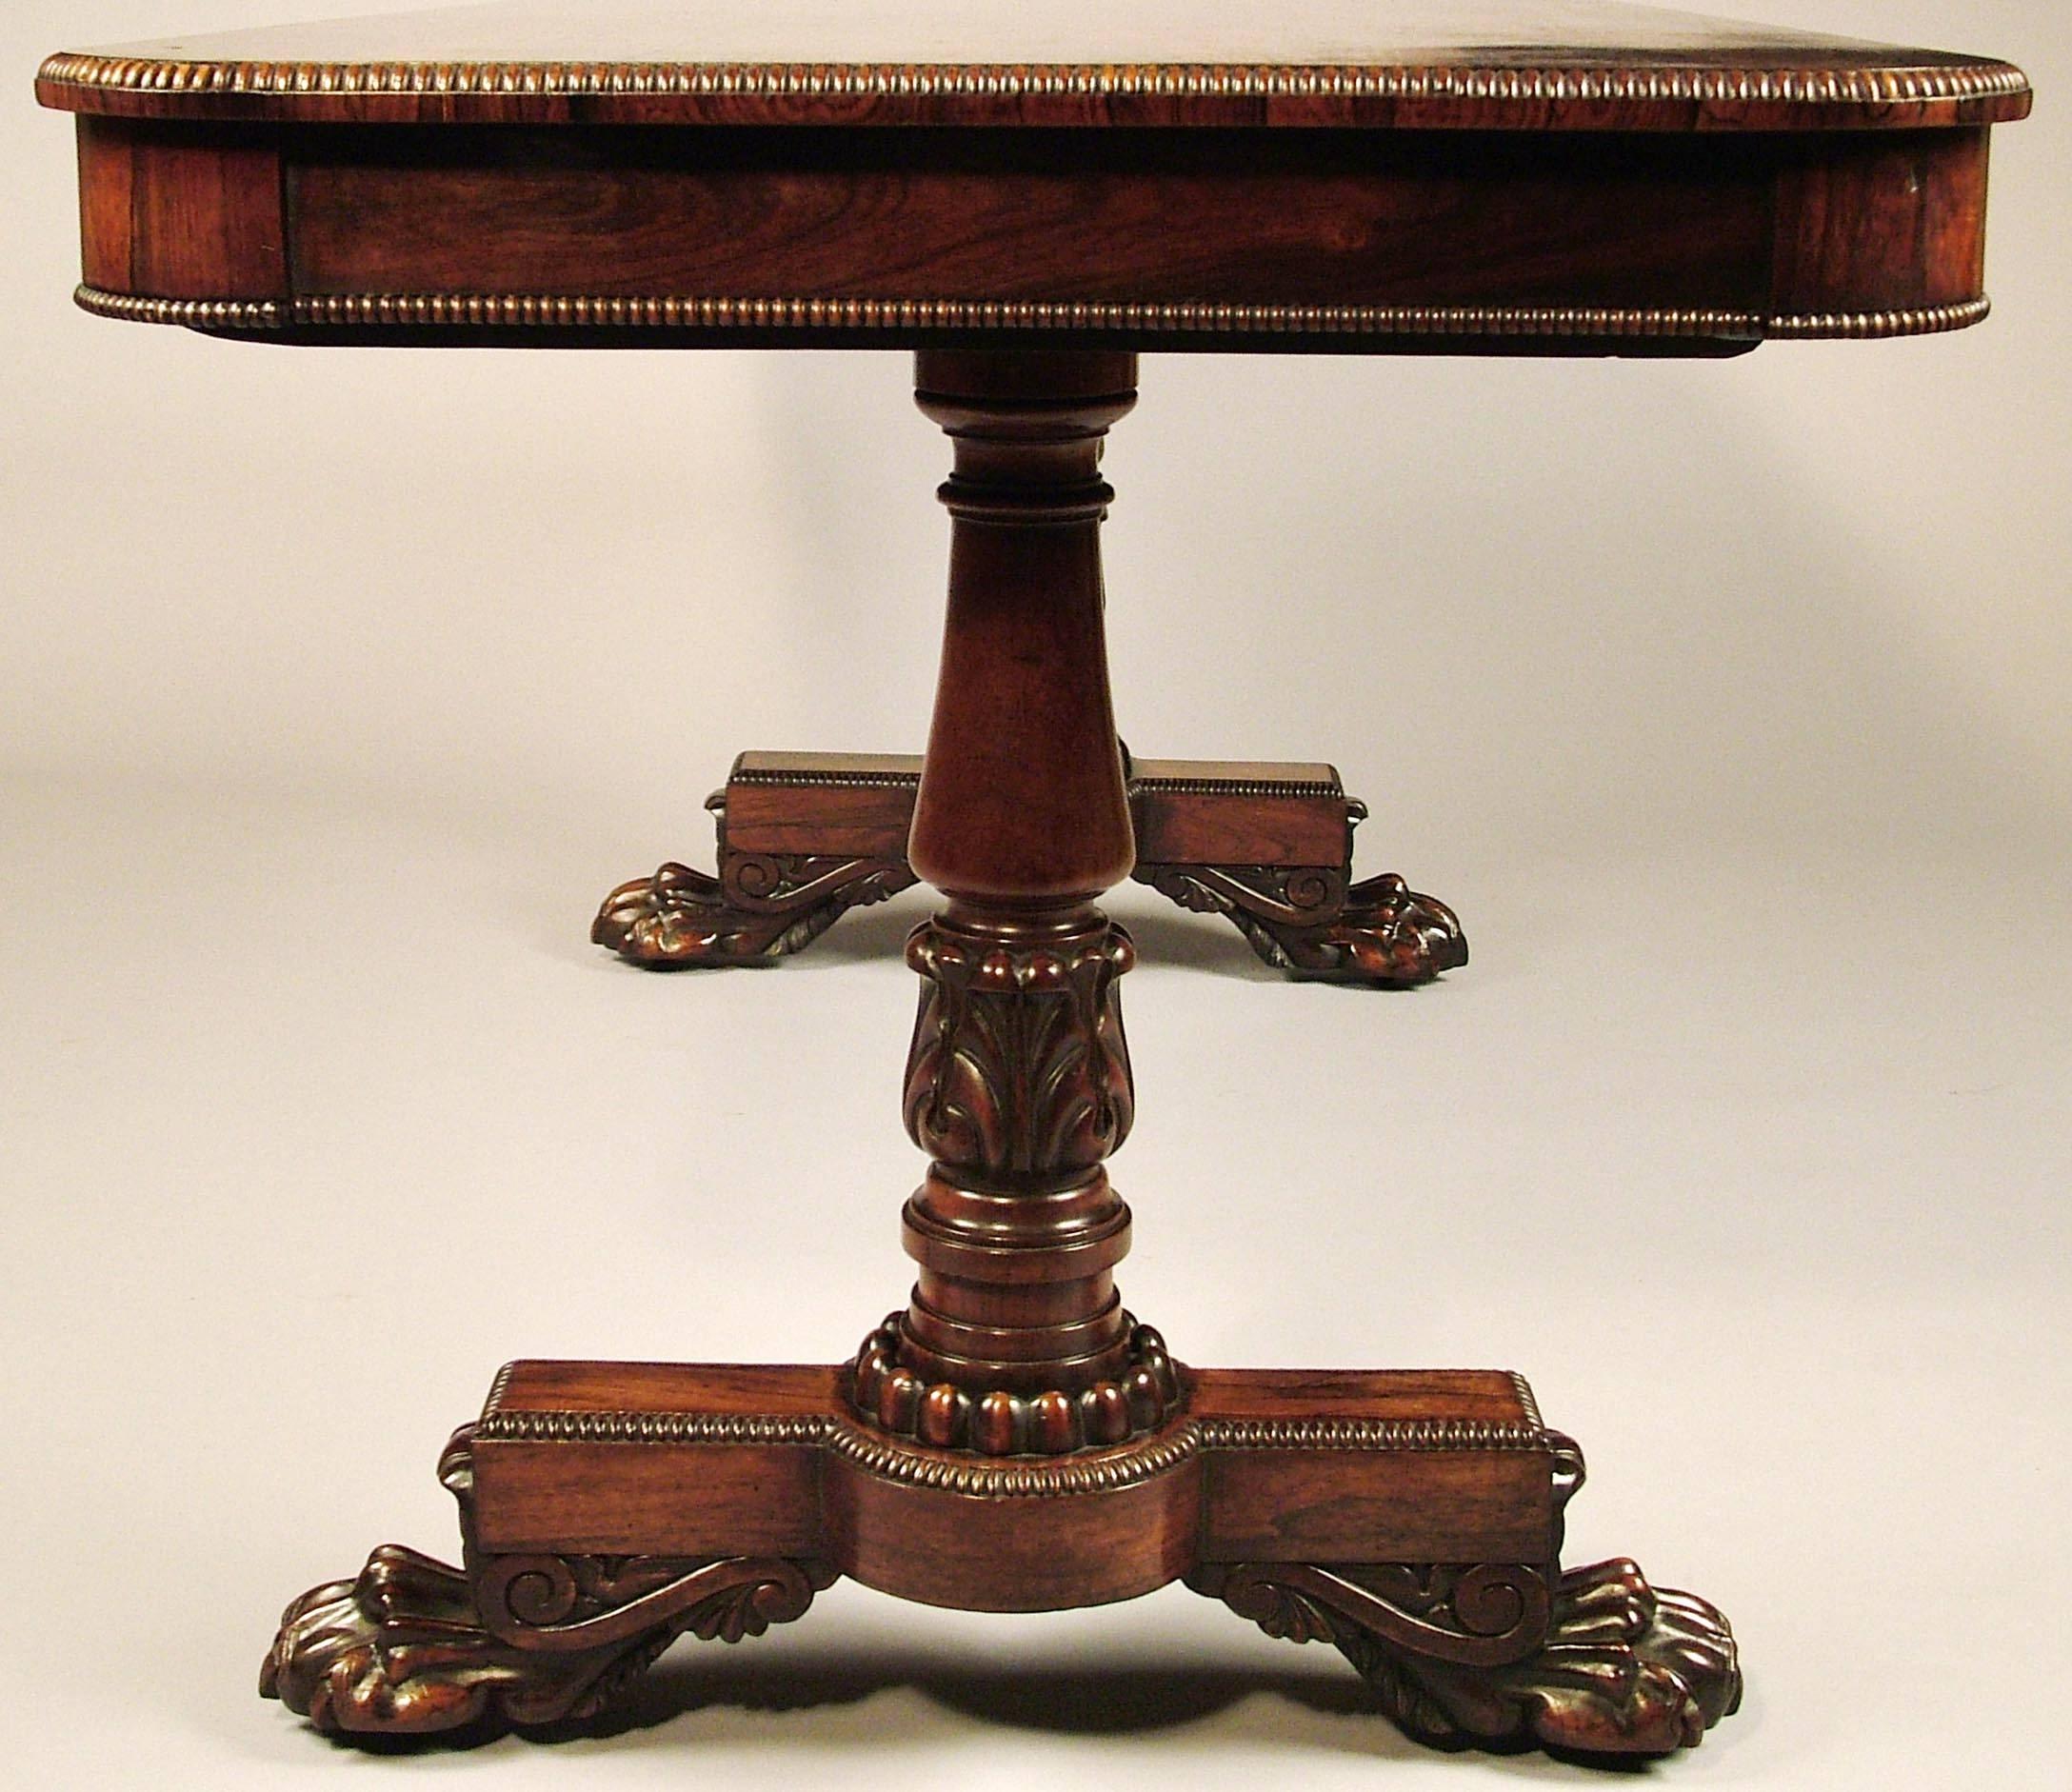 A fine end support table firmly attributed to Gillows of Lancaster.

Constructed in a well figured Goncalo Alves, rising from winged lions claw feet supporting the base platforms; the end columns issuing from a circular plinth, tapering, turned